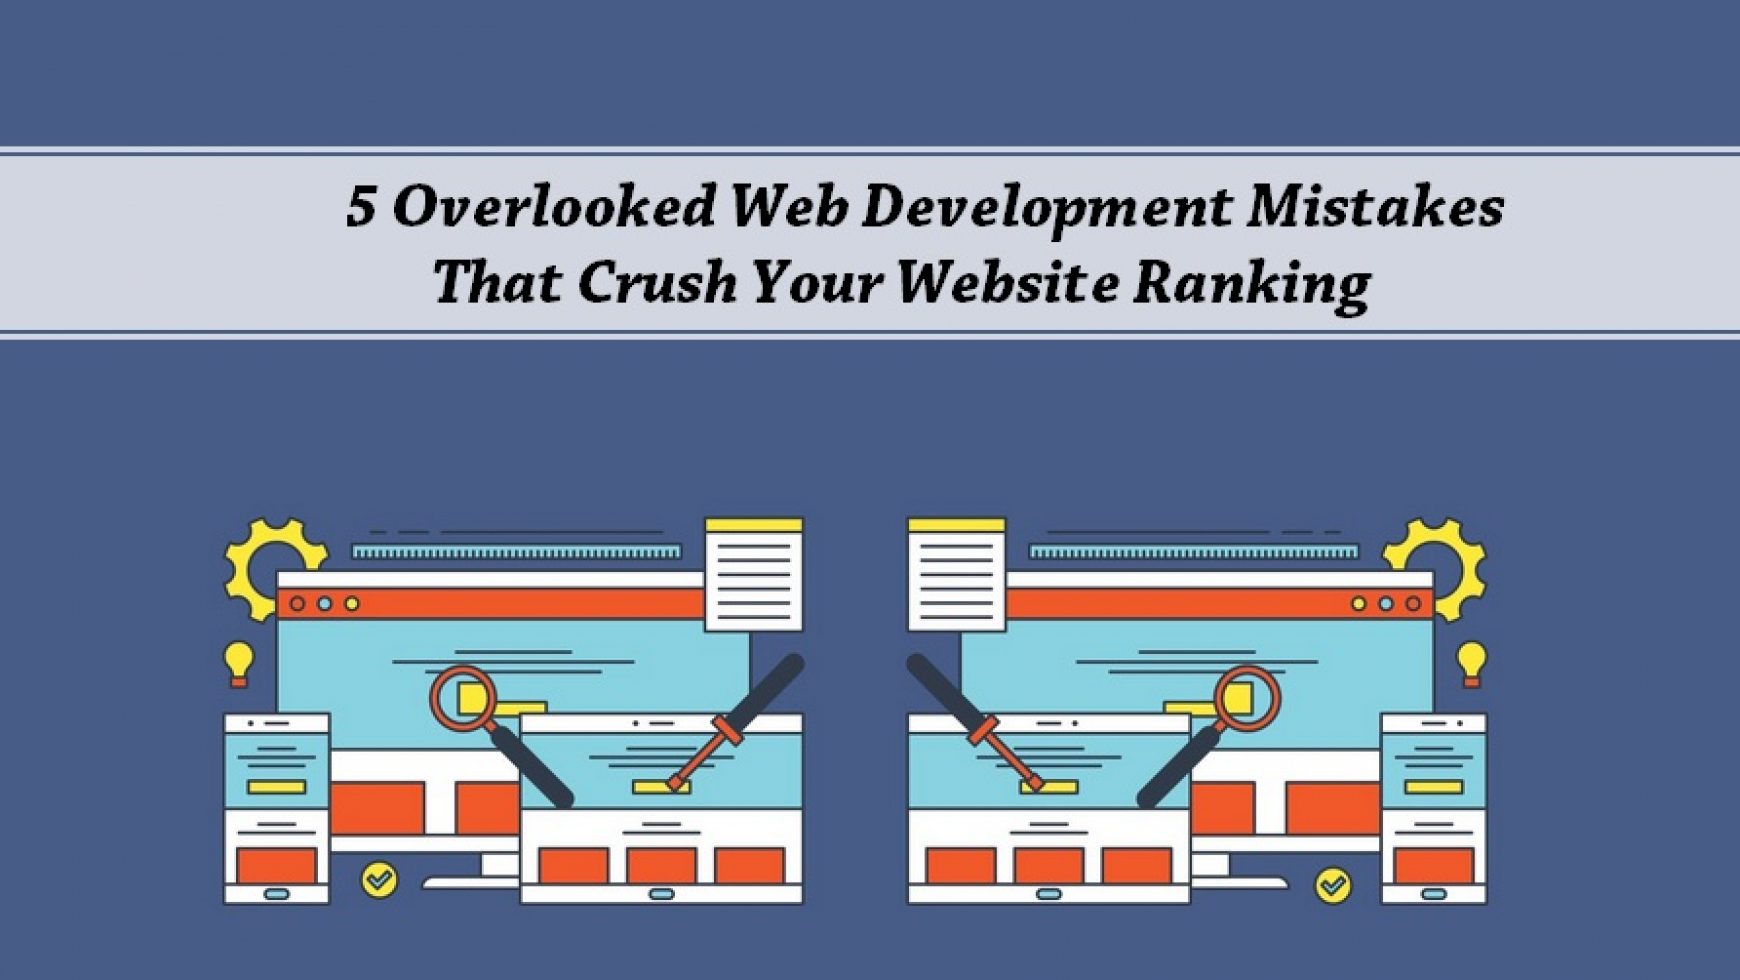 5 Overlooked Web Development Mistakes That Crush Your Website Ranking